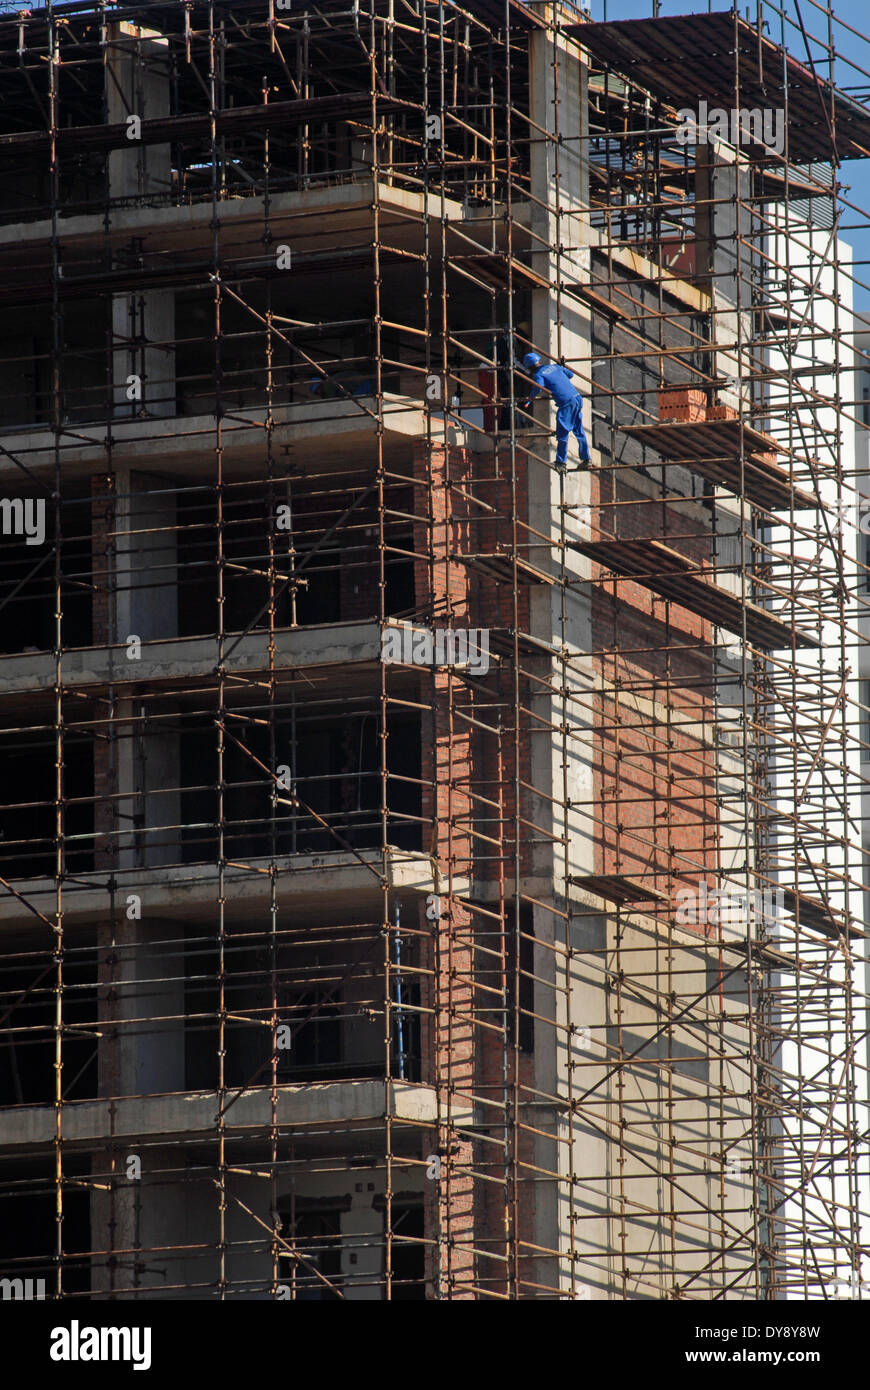 South Africa, Durban, 2008: Building and scaffolding in the inner city area.. Graeme Williams Stock Photo